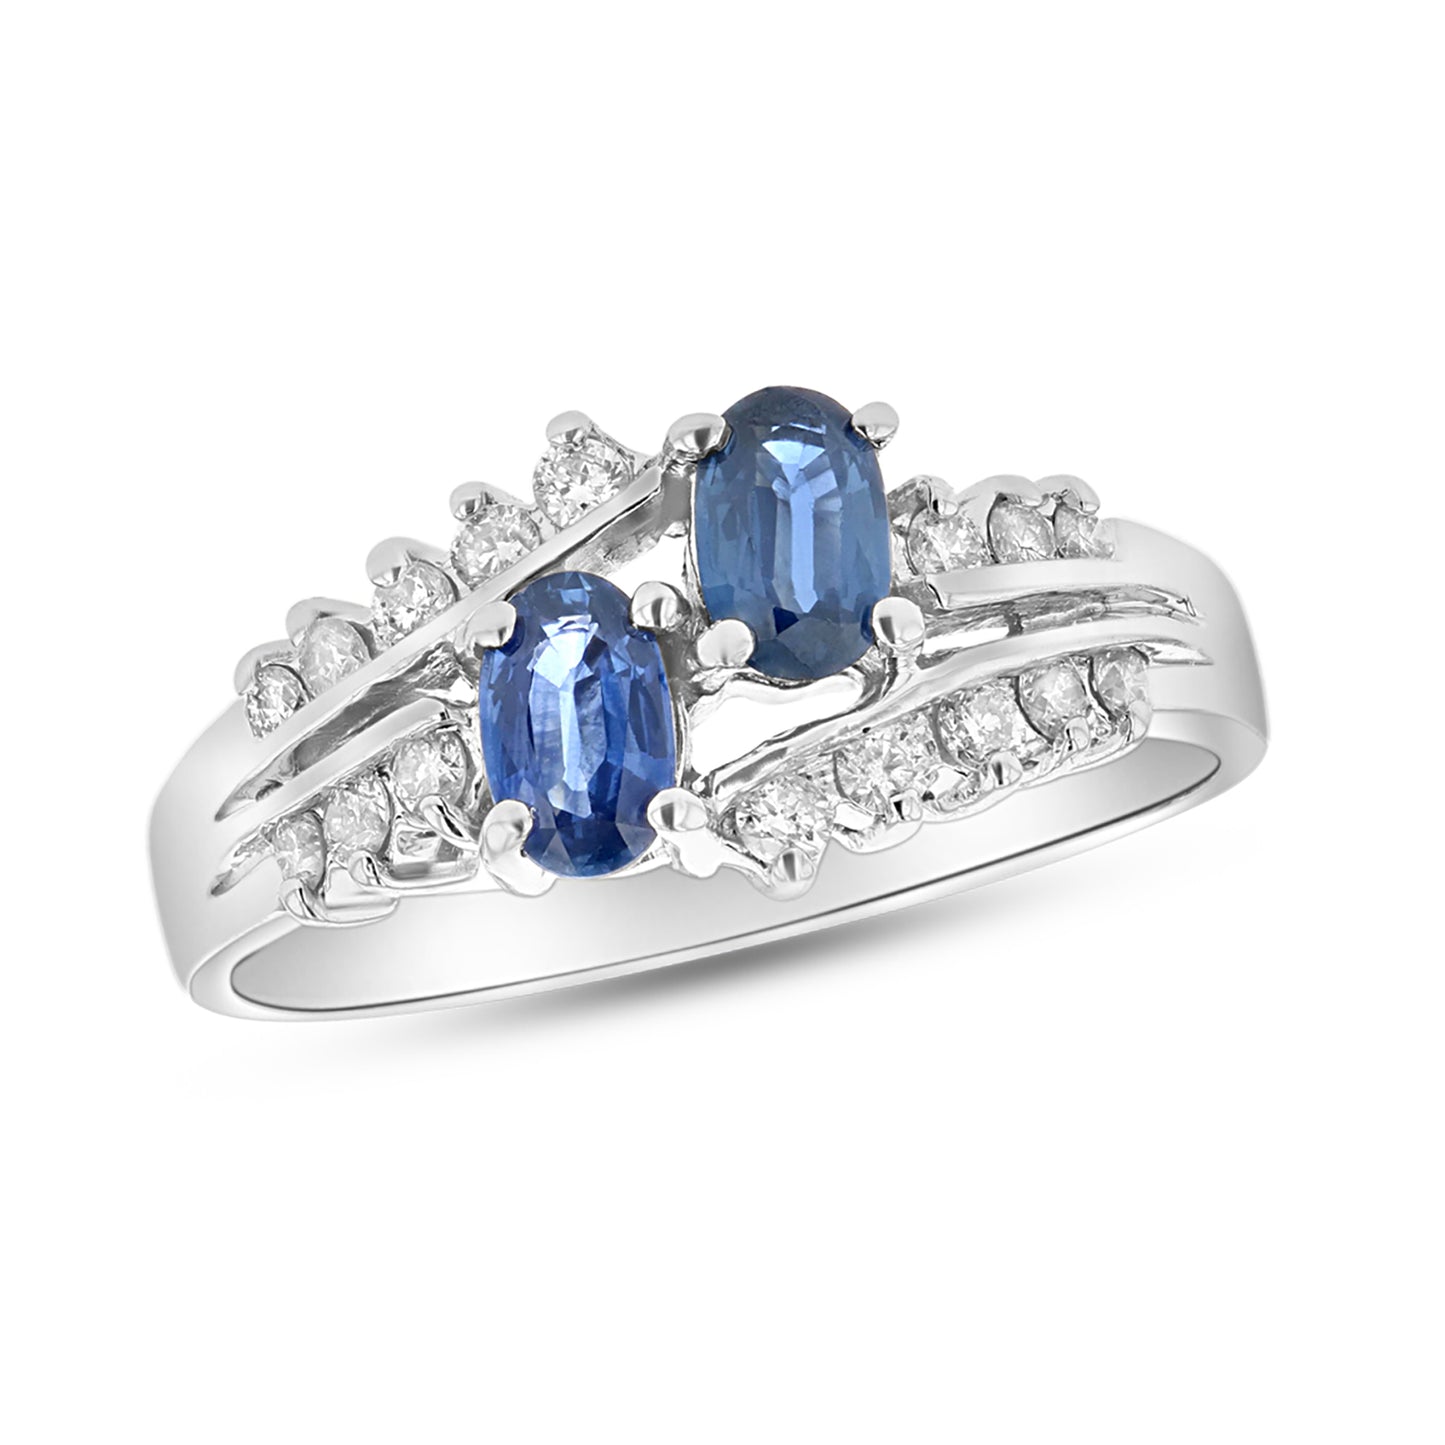 6/7ct Oval-Cut Blue Sapphire & Diamond Two-Stone Ring in 14k White Gold